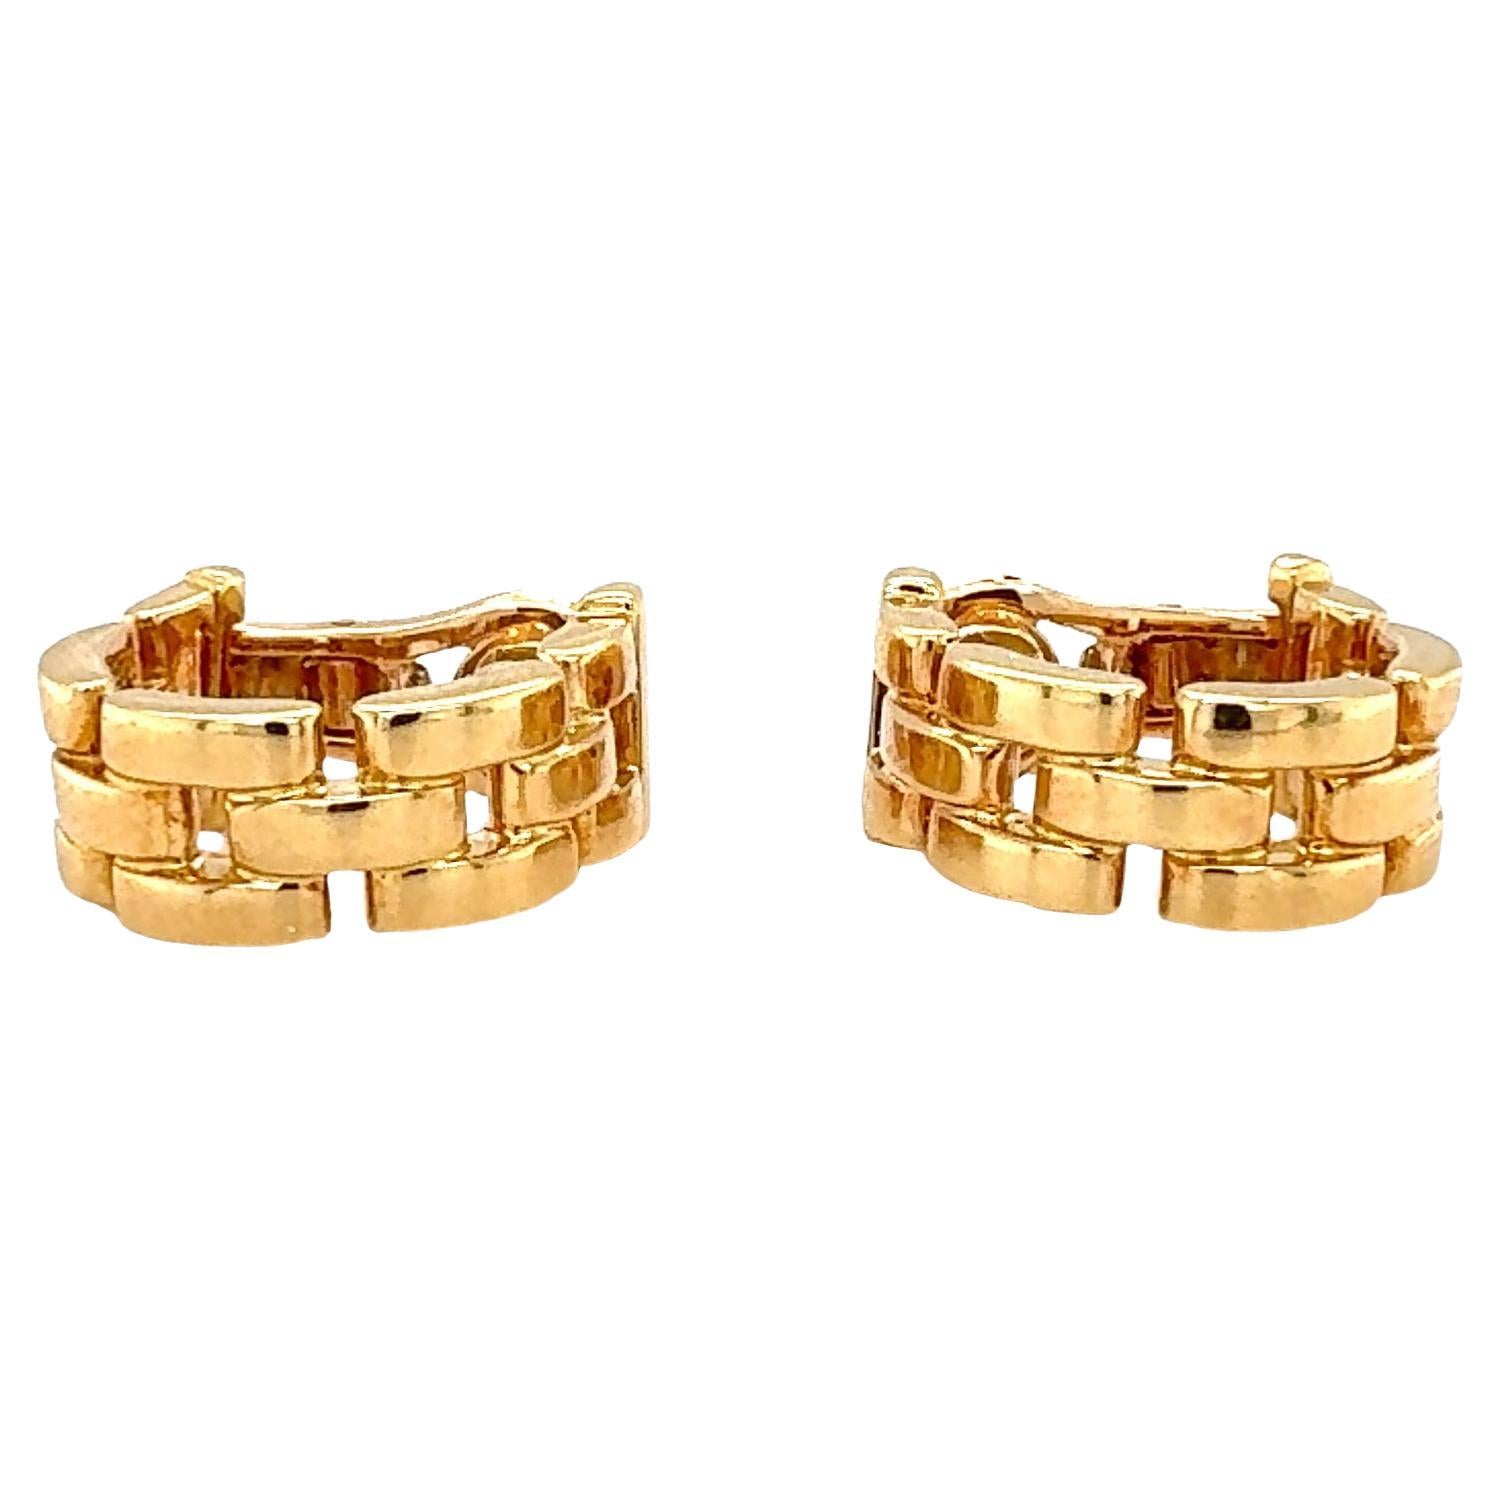 18K Yellow Gold Maillon Panthere Hoop Earrings